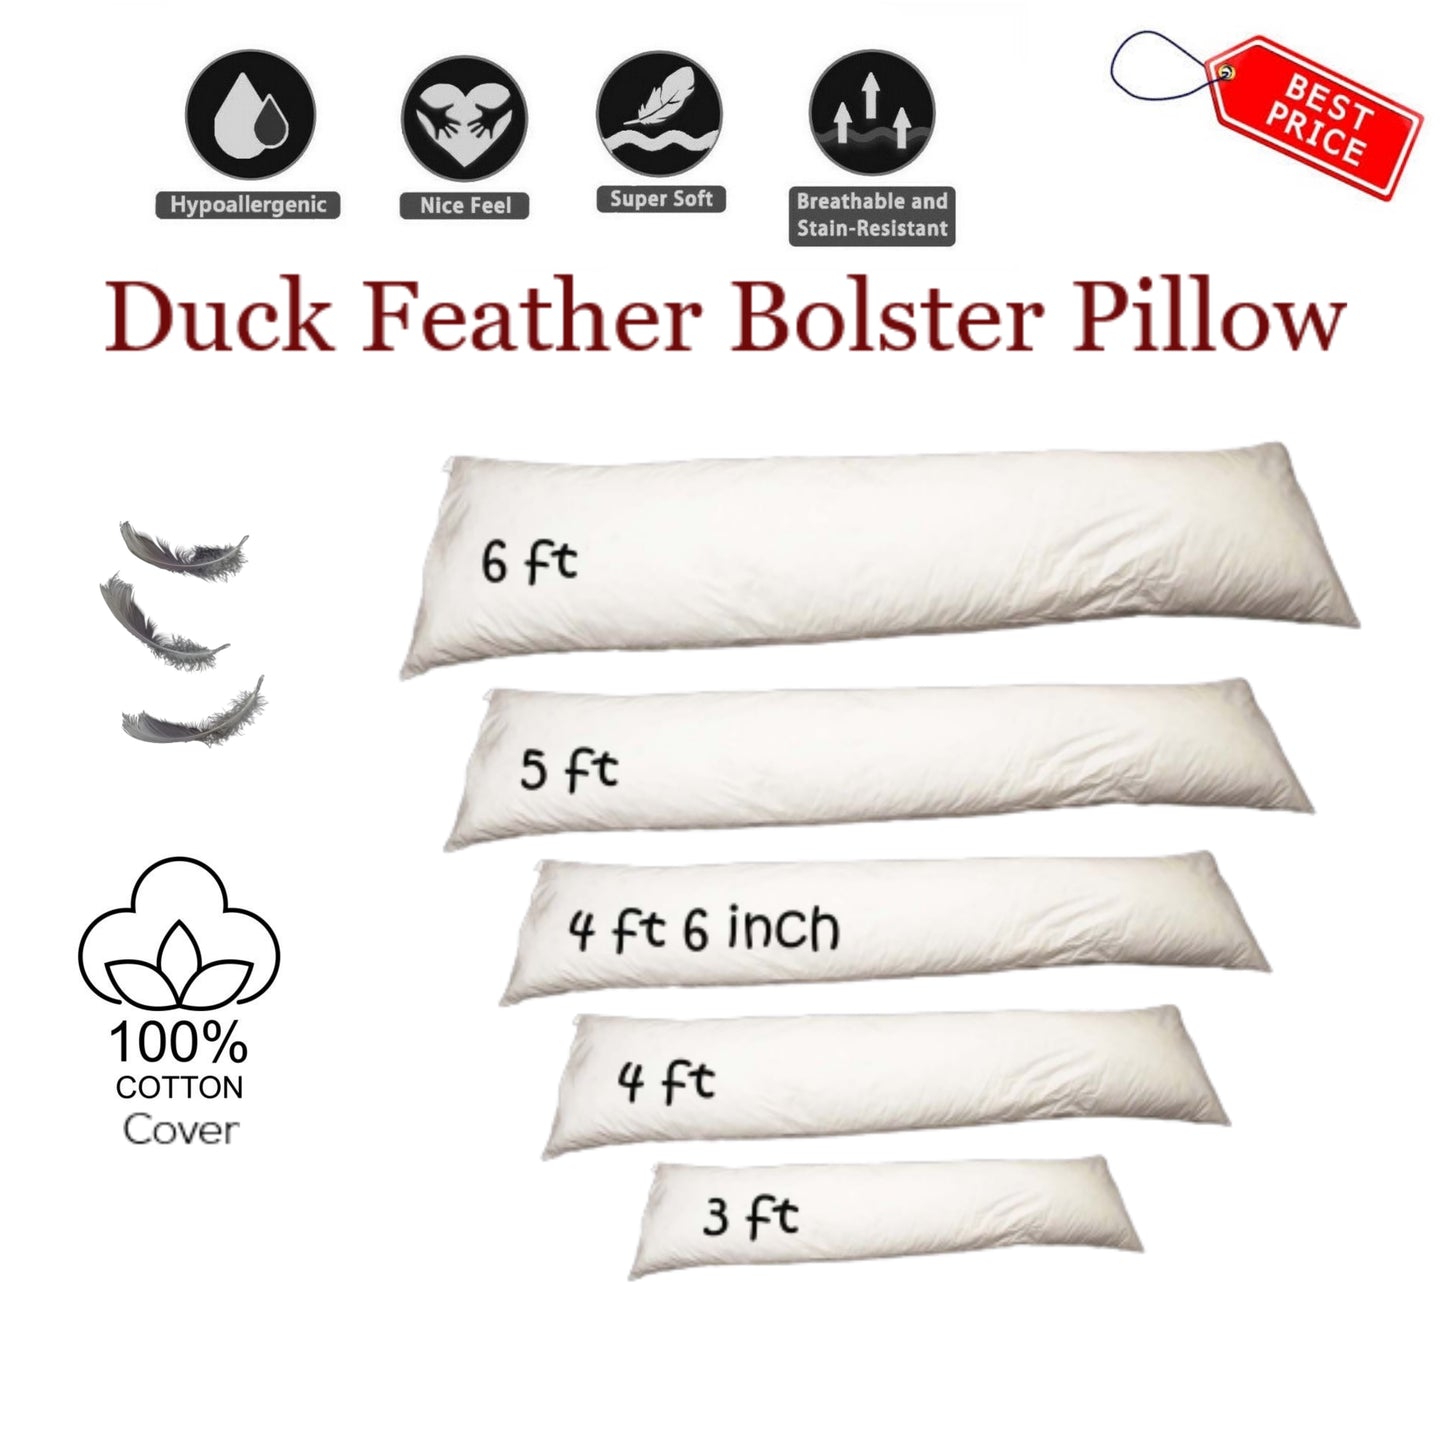 Duck Feather Down Bolster Pillow Cushion Long Body Support Orthopedic Pregnancy